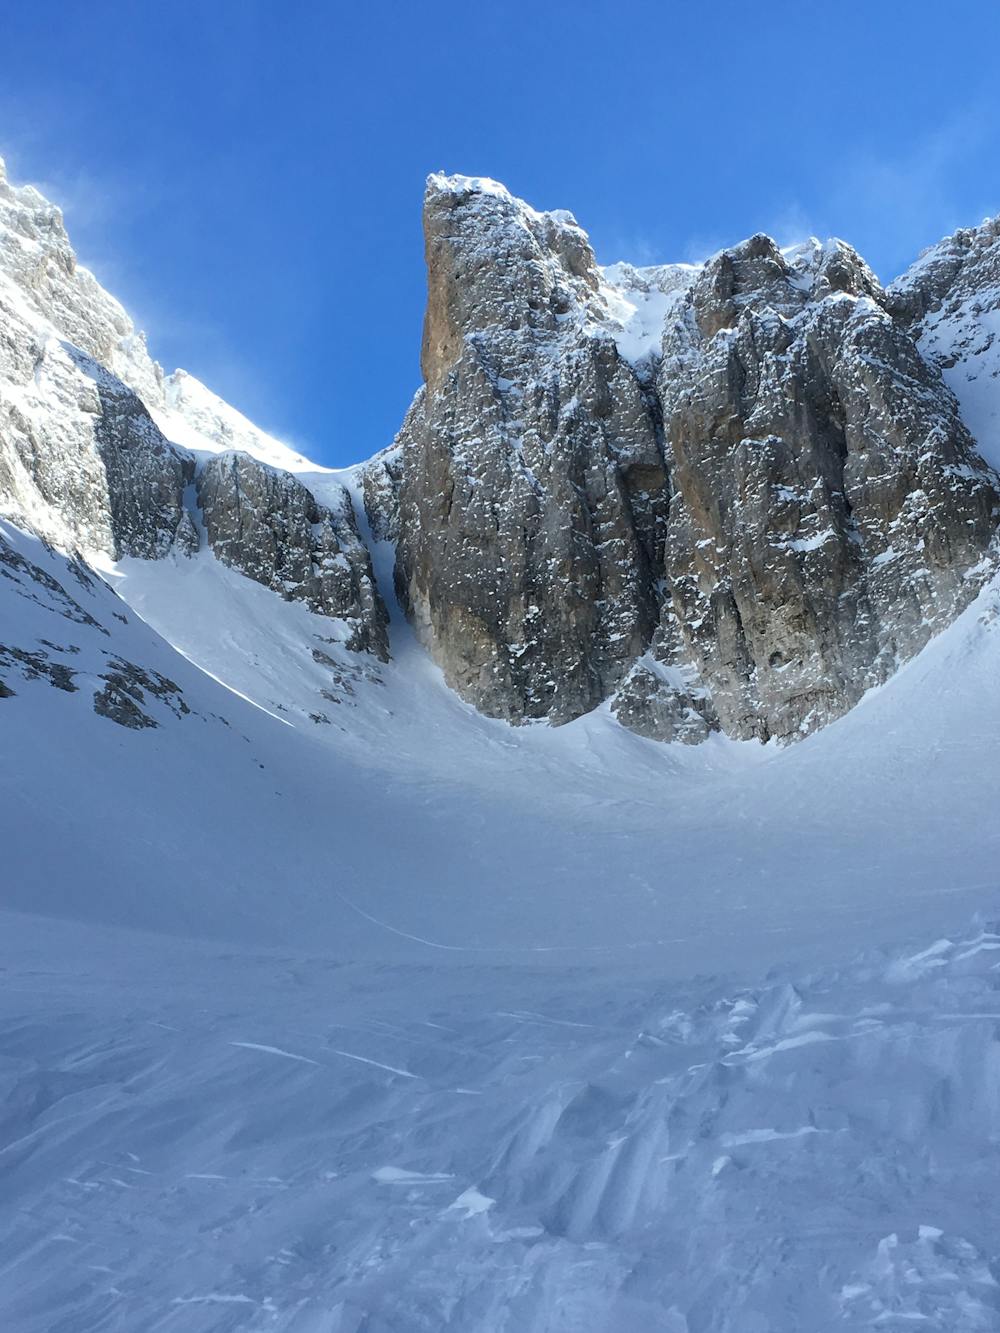 The couloir from below